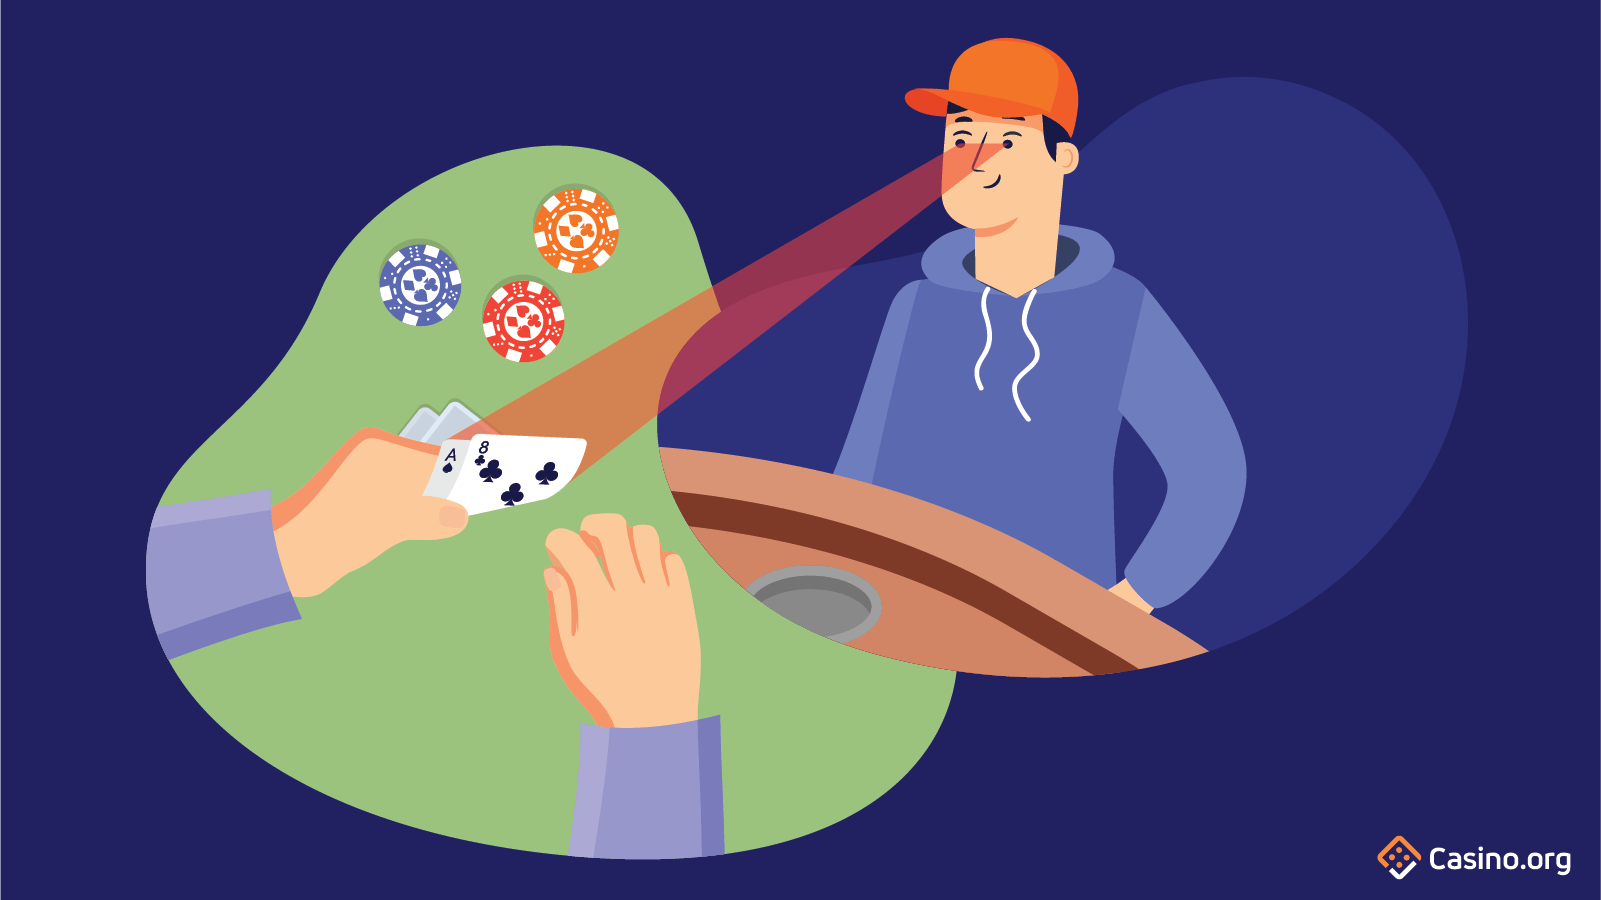 Person trying to look at someone else's cards in poker - a form of angle shooting.